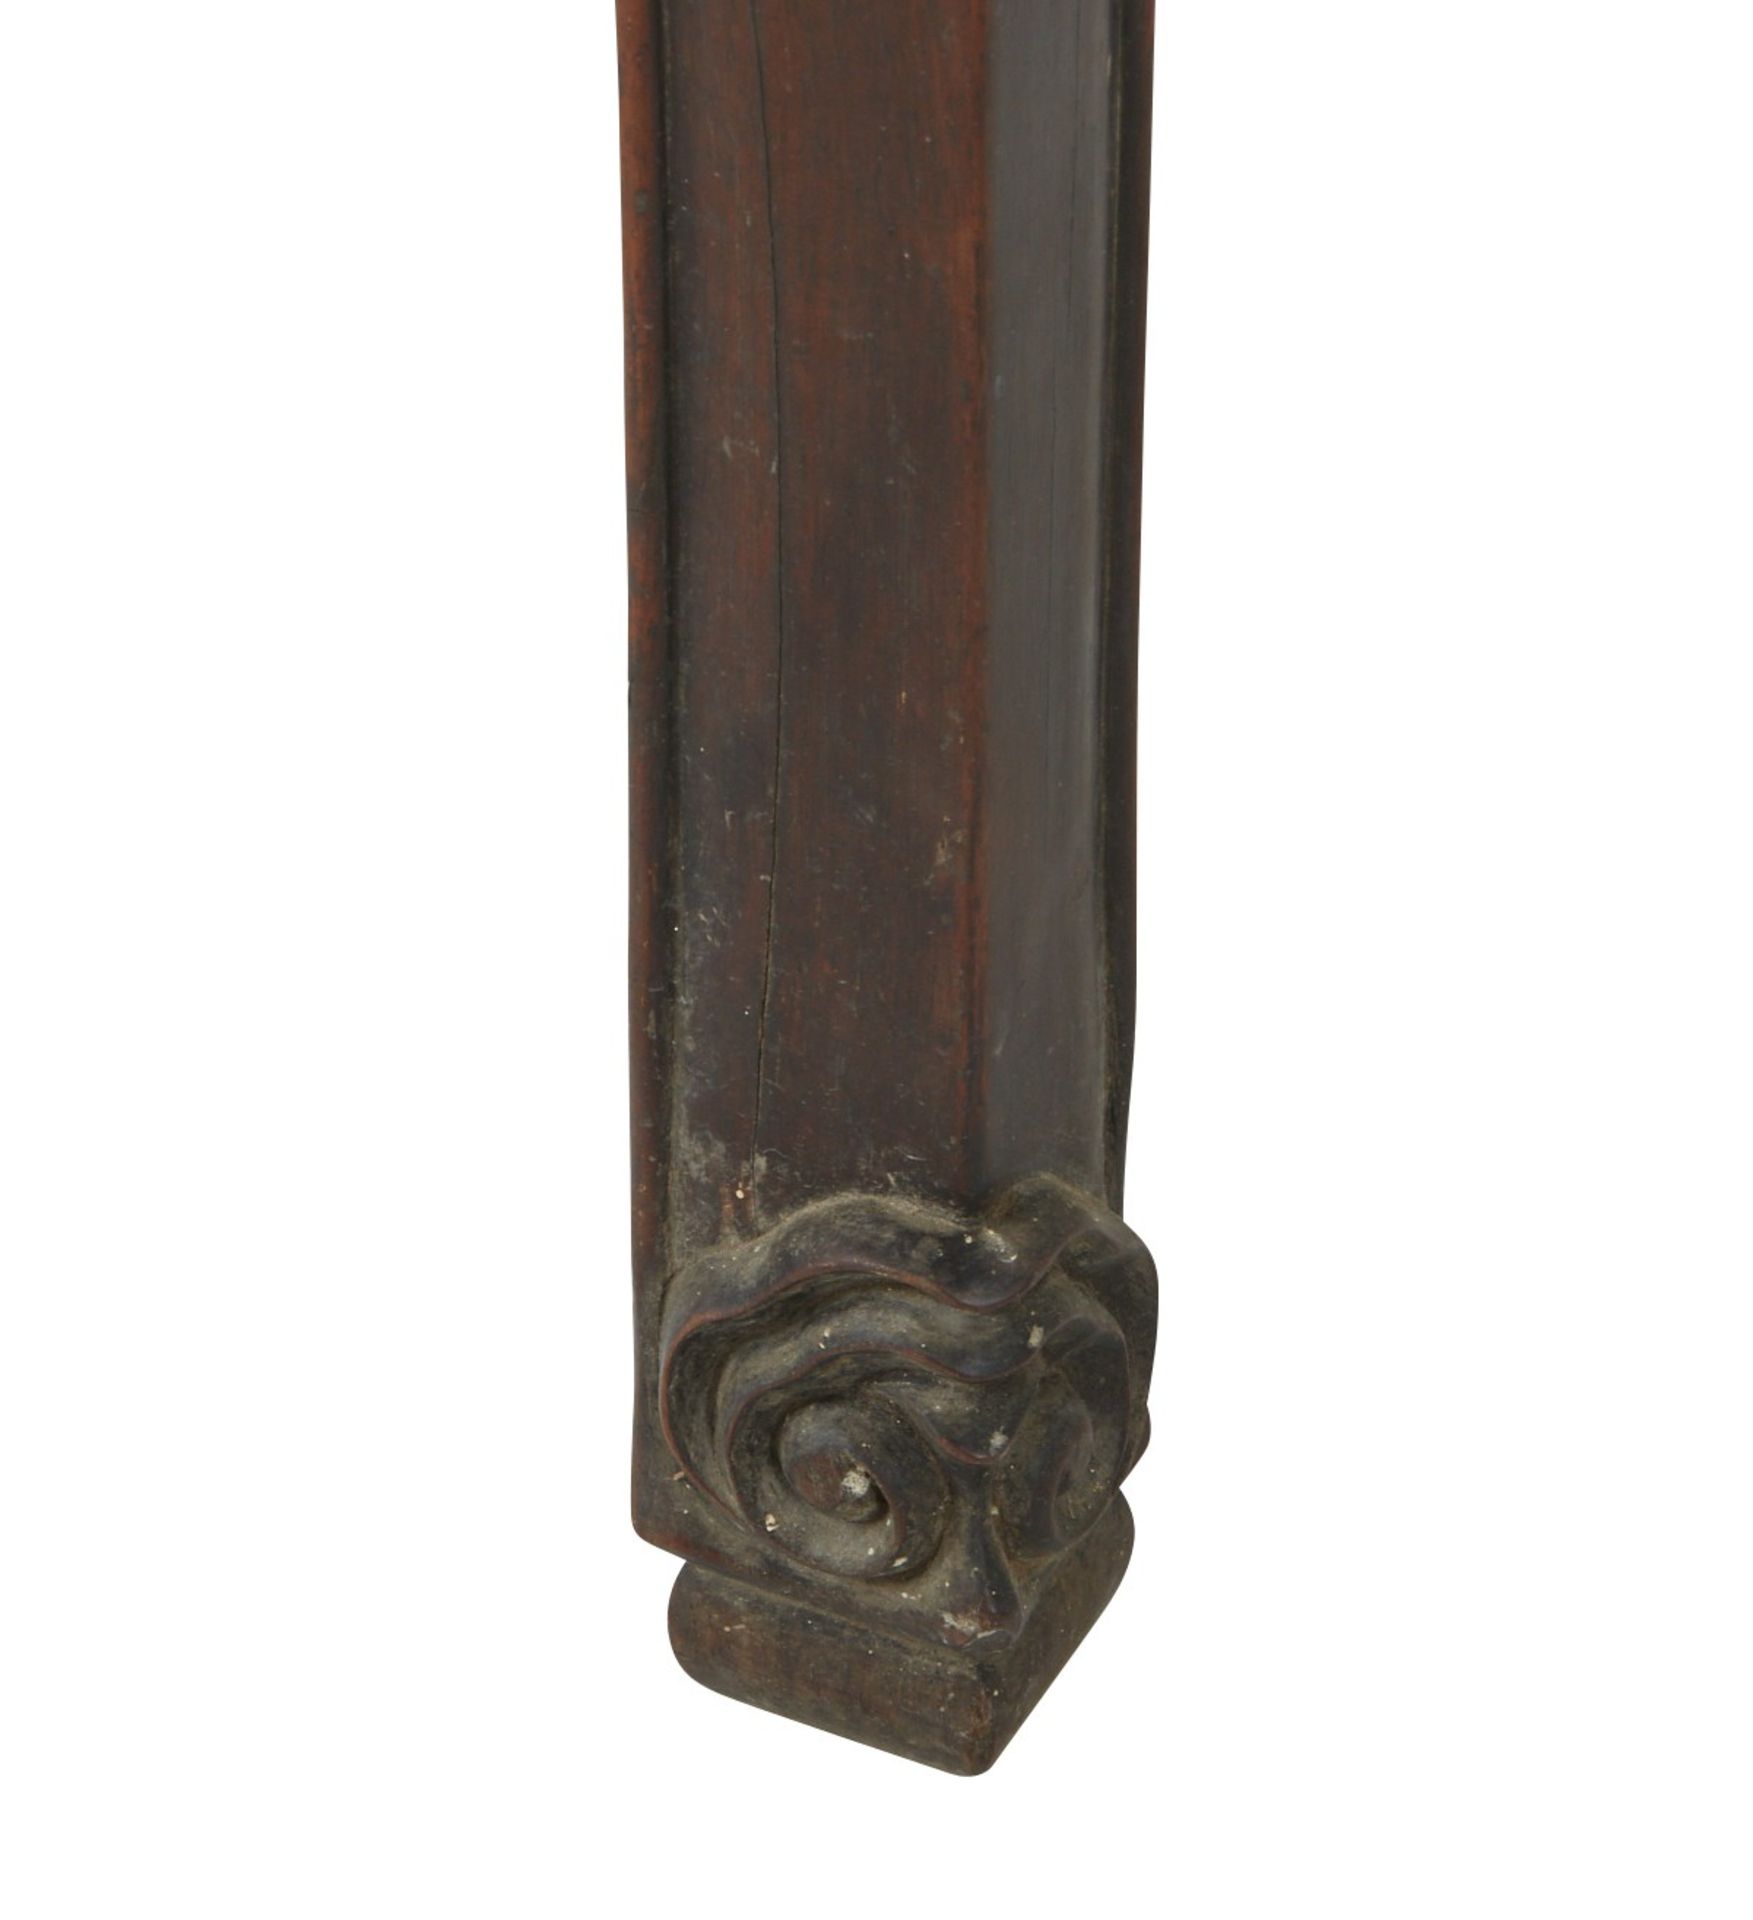 19th c. Chinese Rosewood Stand w/ Carved Skirt - Image 8 of 8